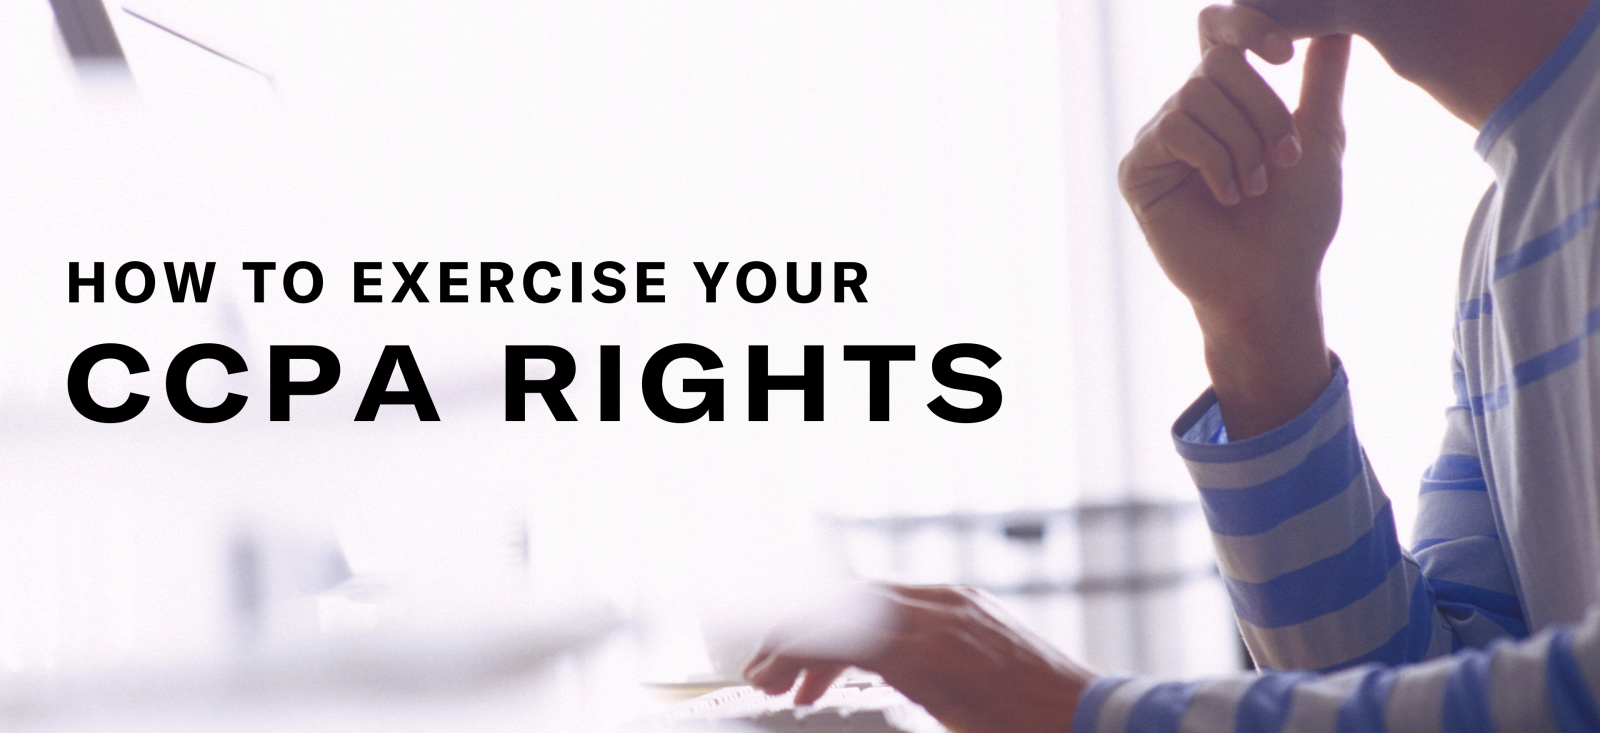 Everything you need to exercise your CCPA rights in 2020